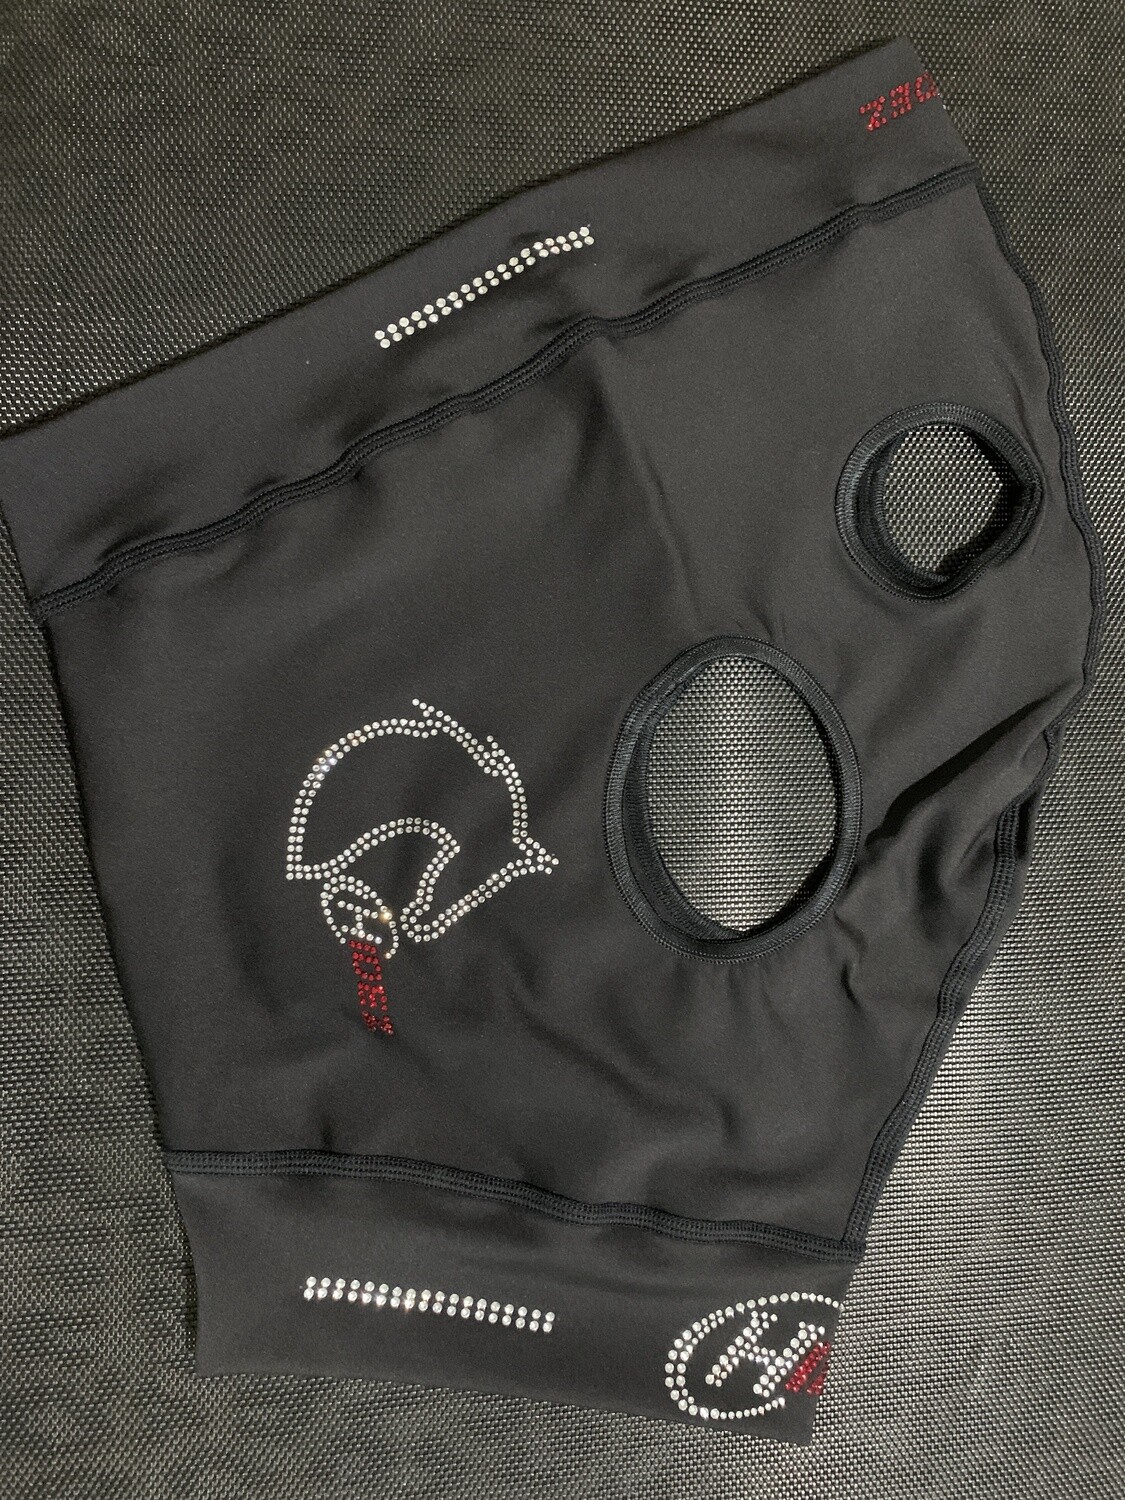 Black Medium Mask With Bling - in stock now